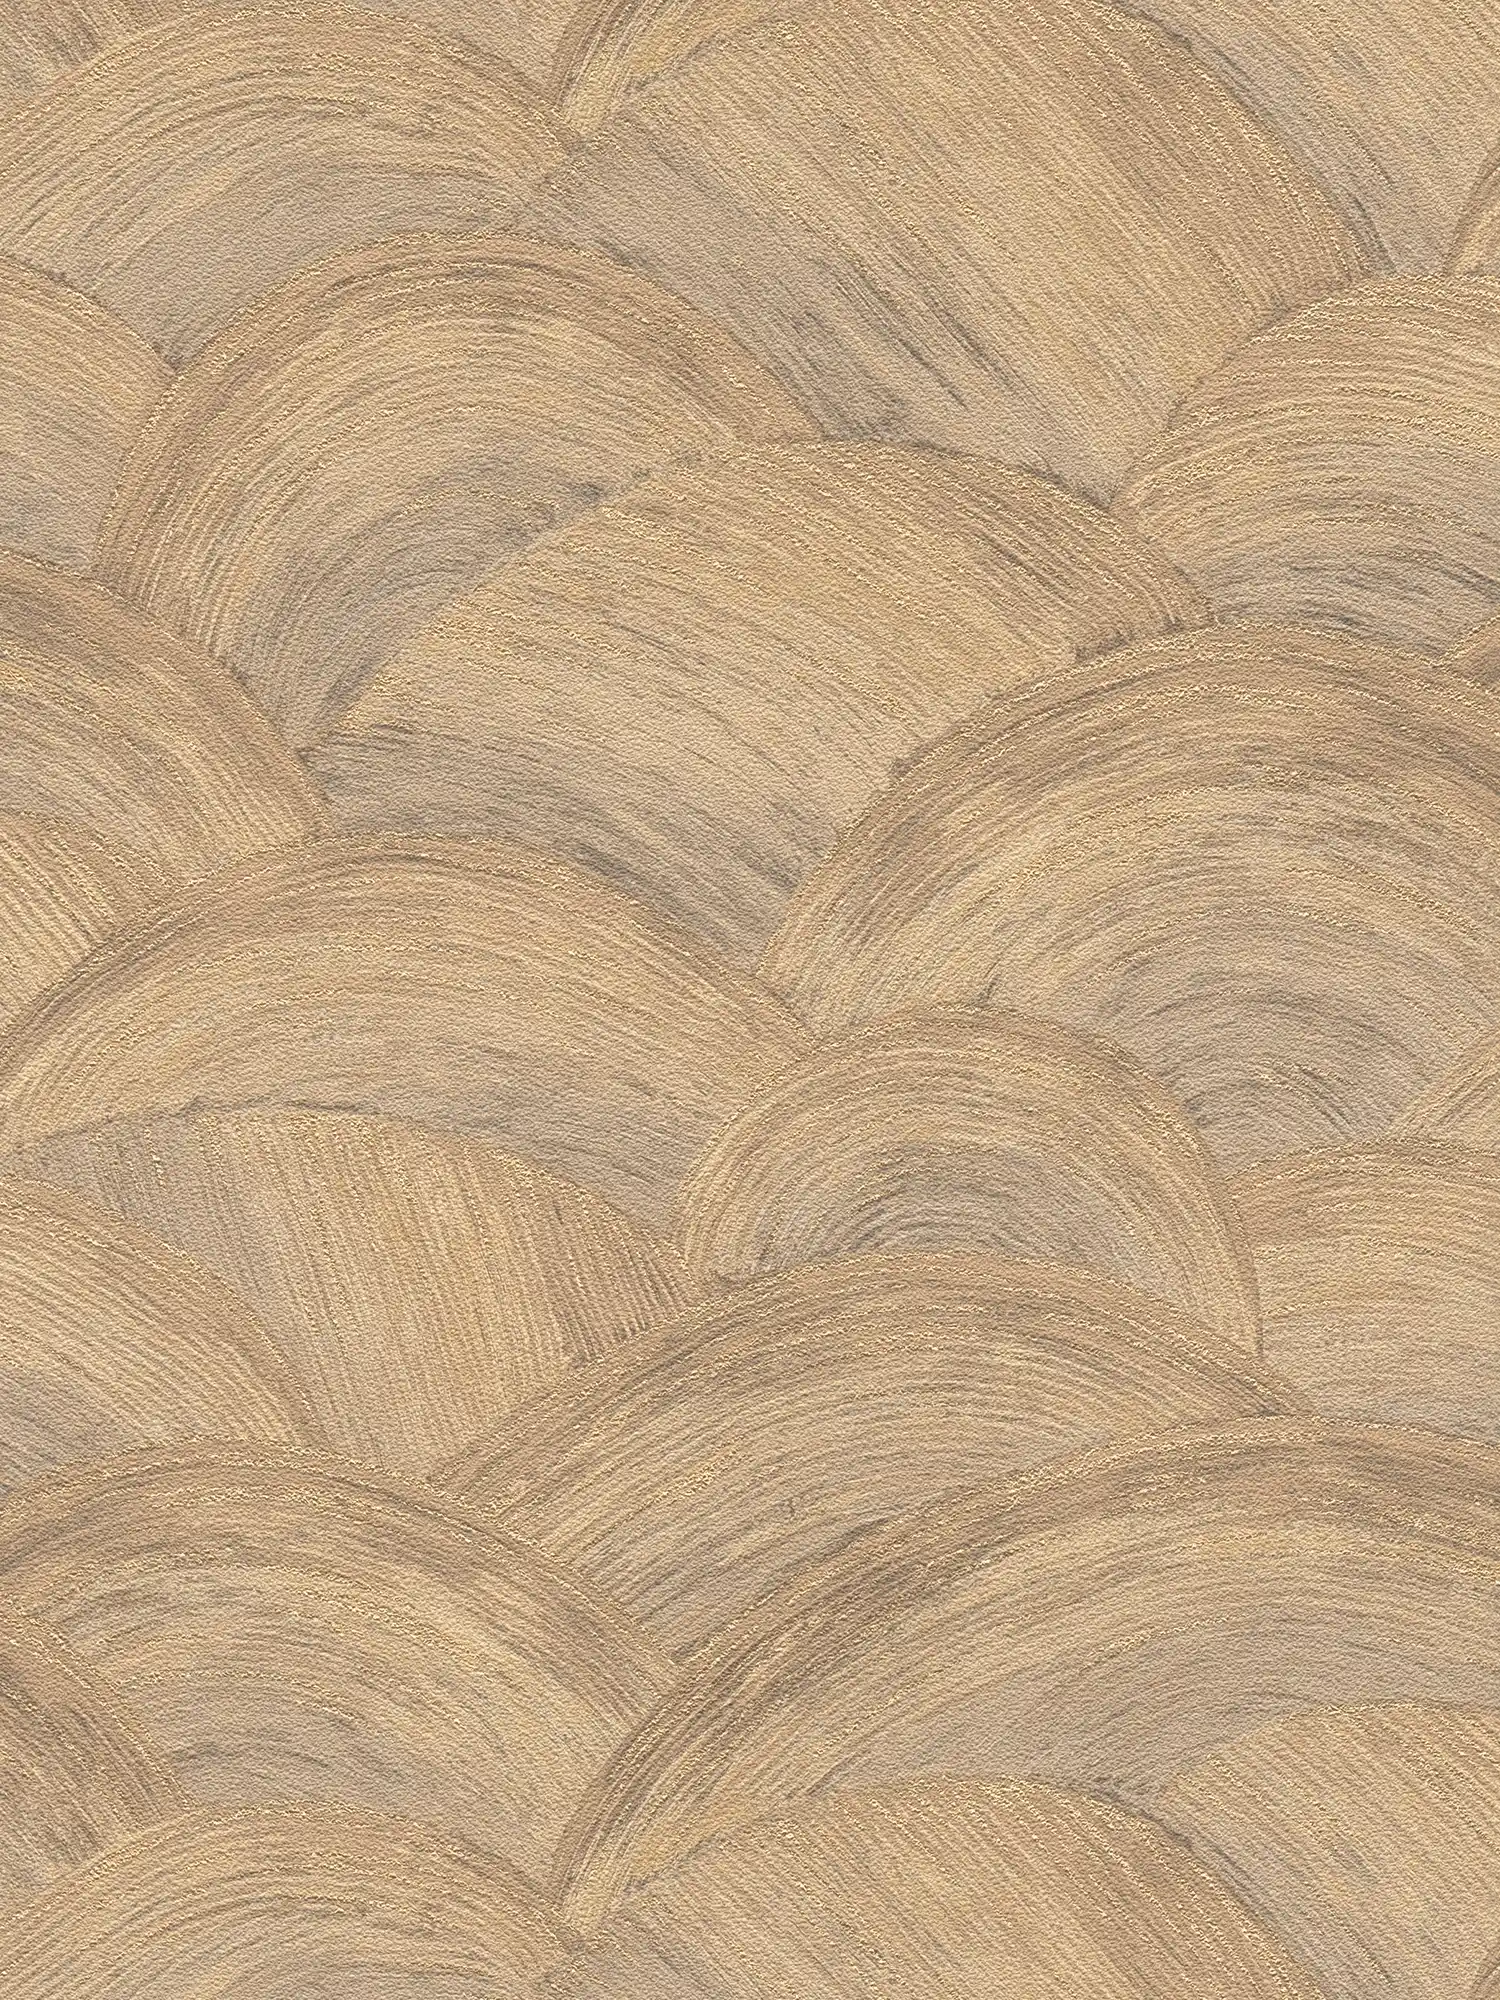 Non-woven wallpaper with shiny wave pattern - beige, brown, gold
